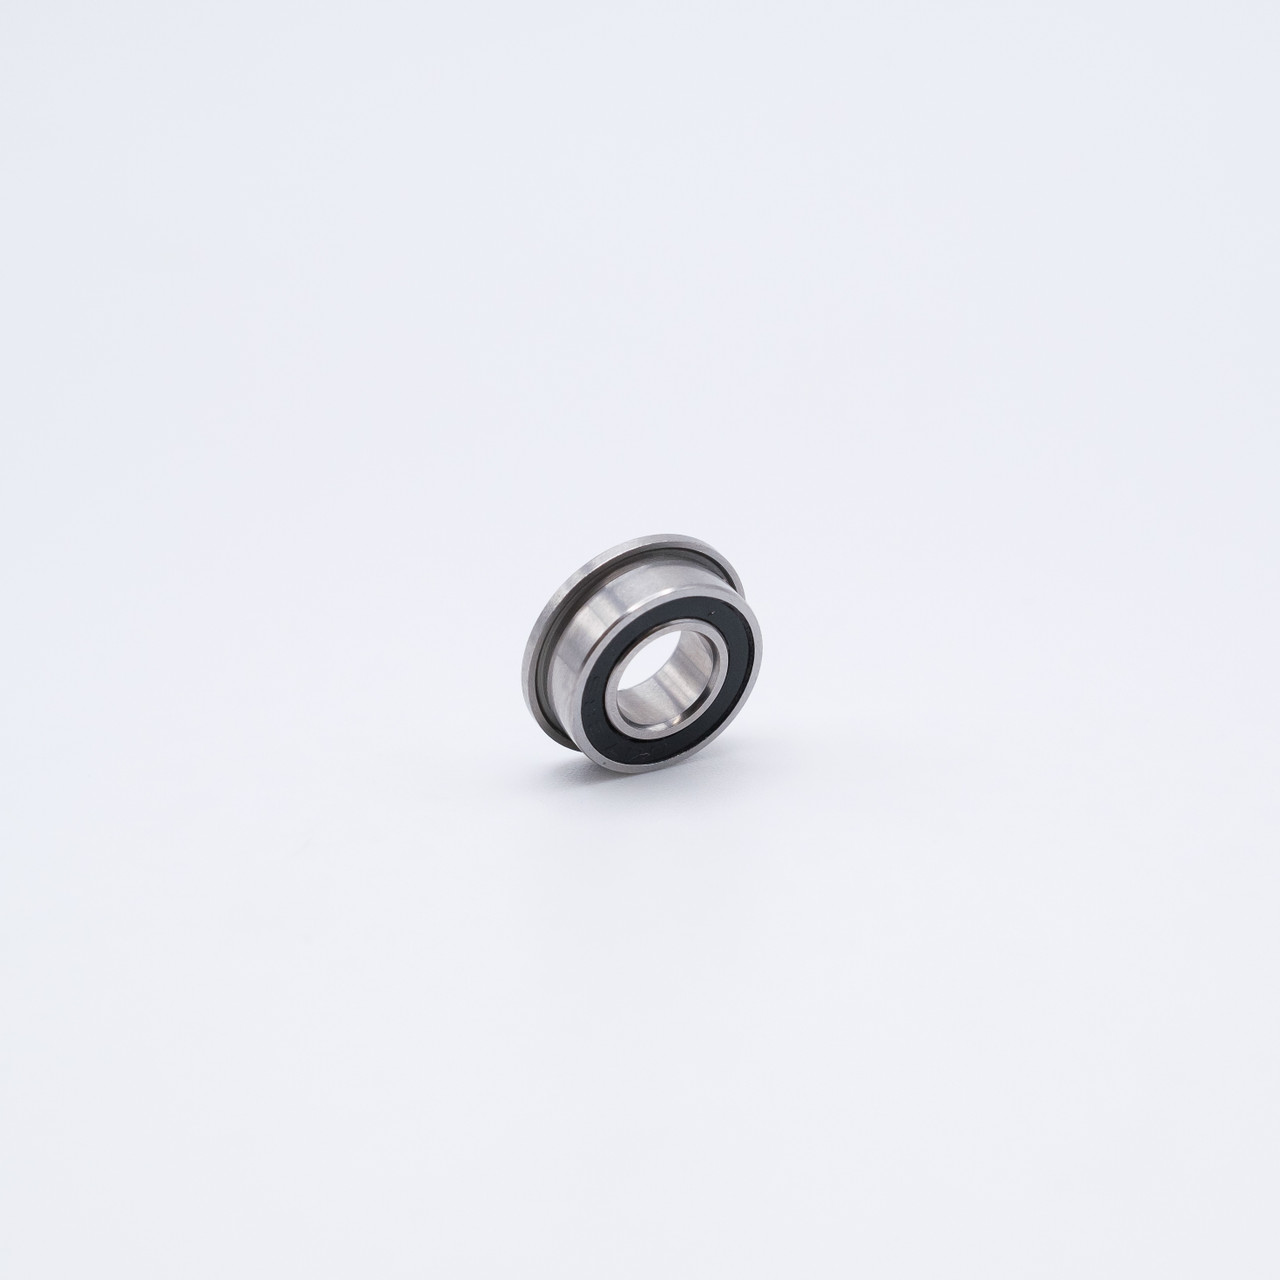 F698-2RS Miniature Flanged Ball Bearing 8x19x6mm Side View